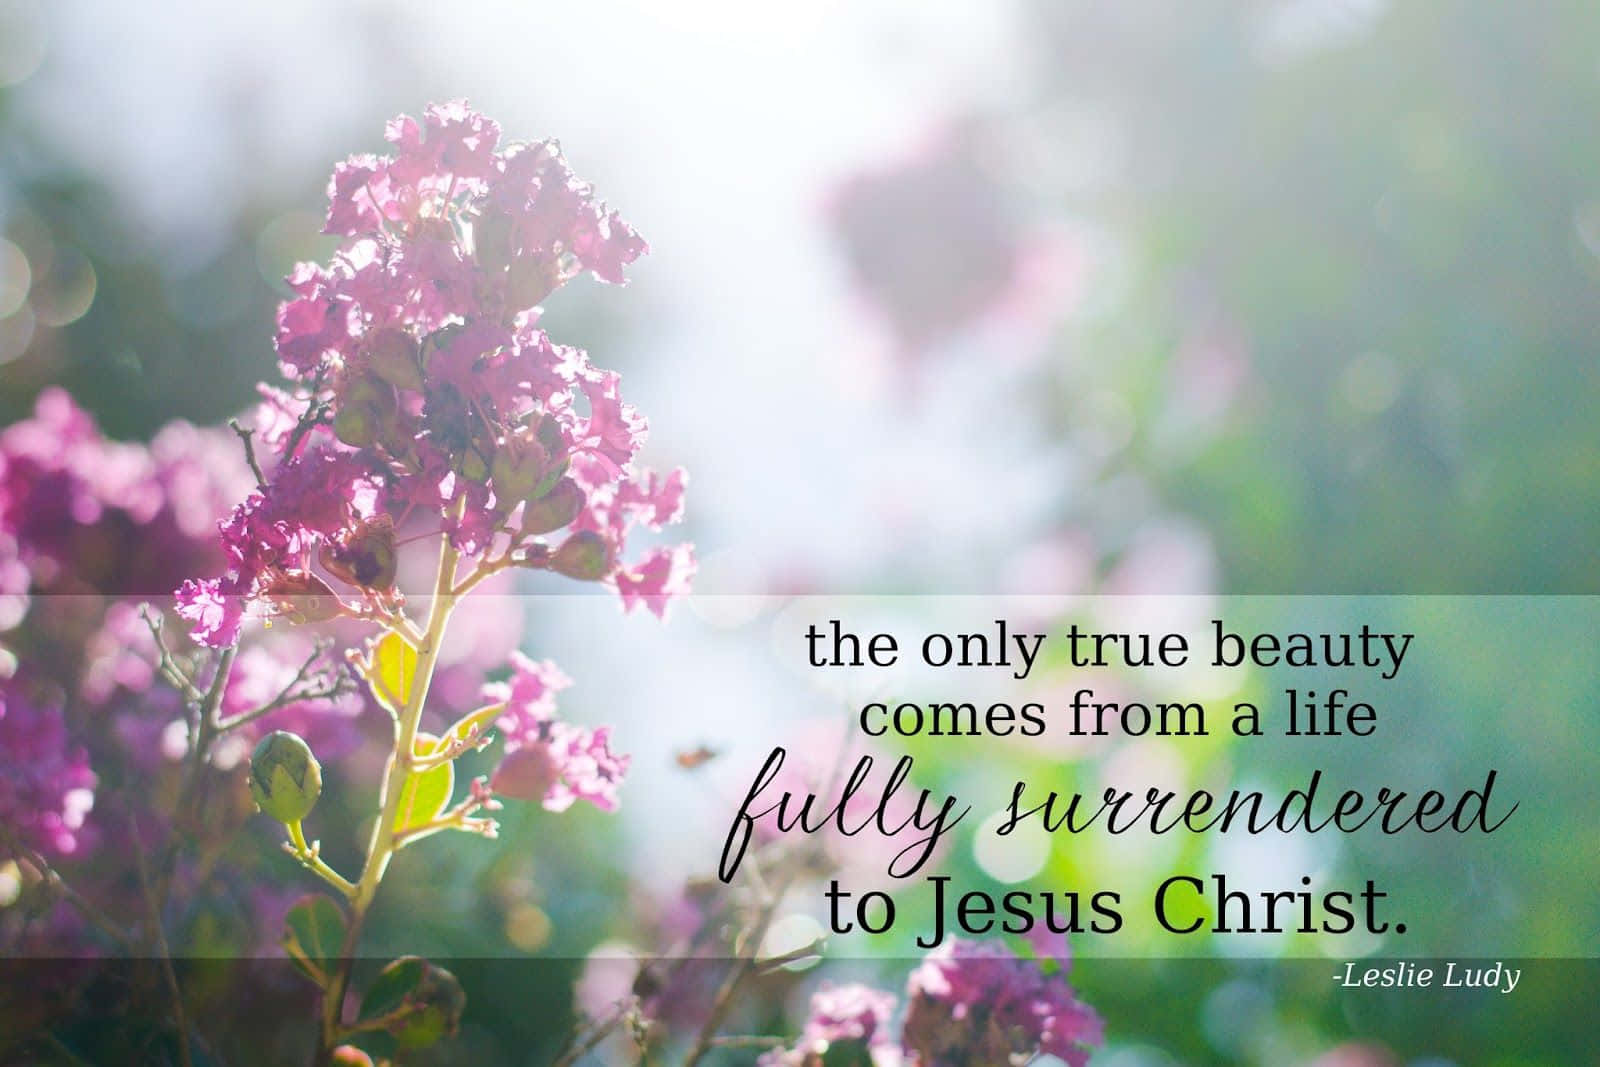 "Experience God’s beauty every day" Wallpaper